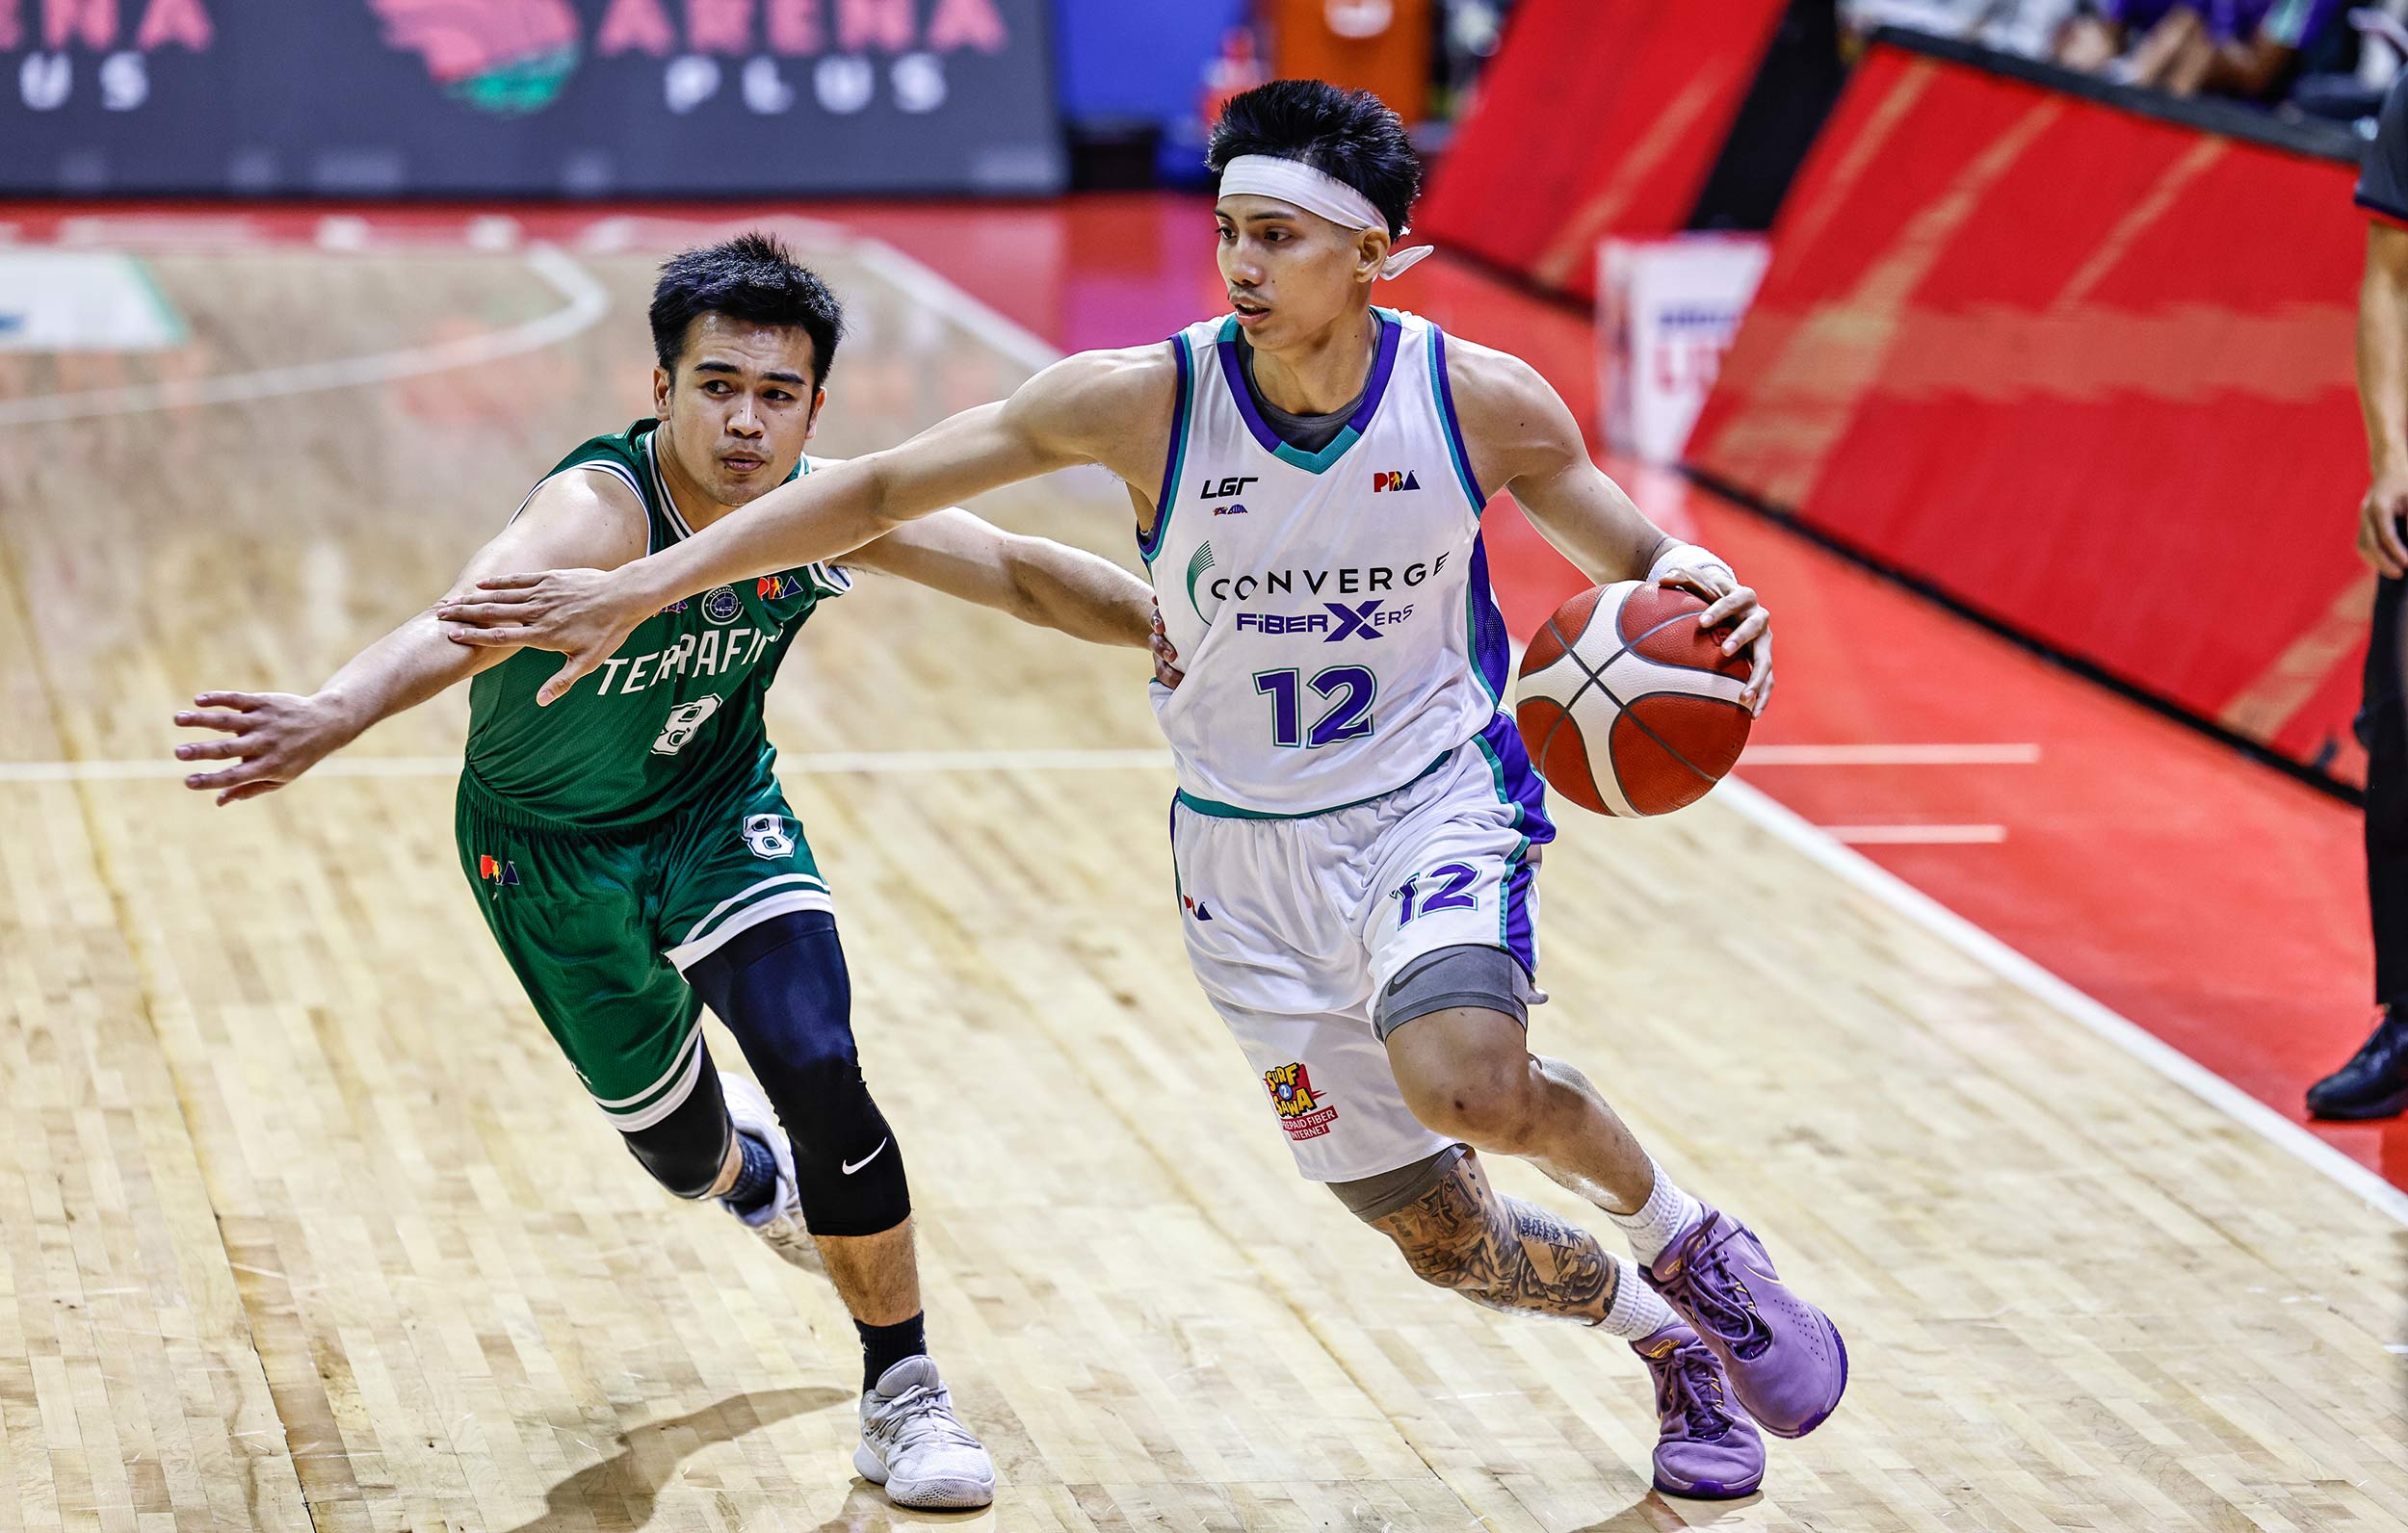 pba: amid trade rumors, alec stockton says ‘he’s committed to where i’m at’